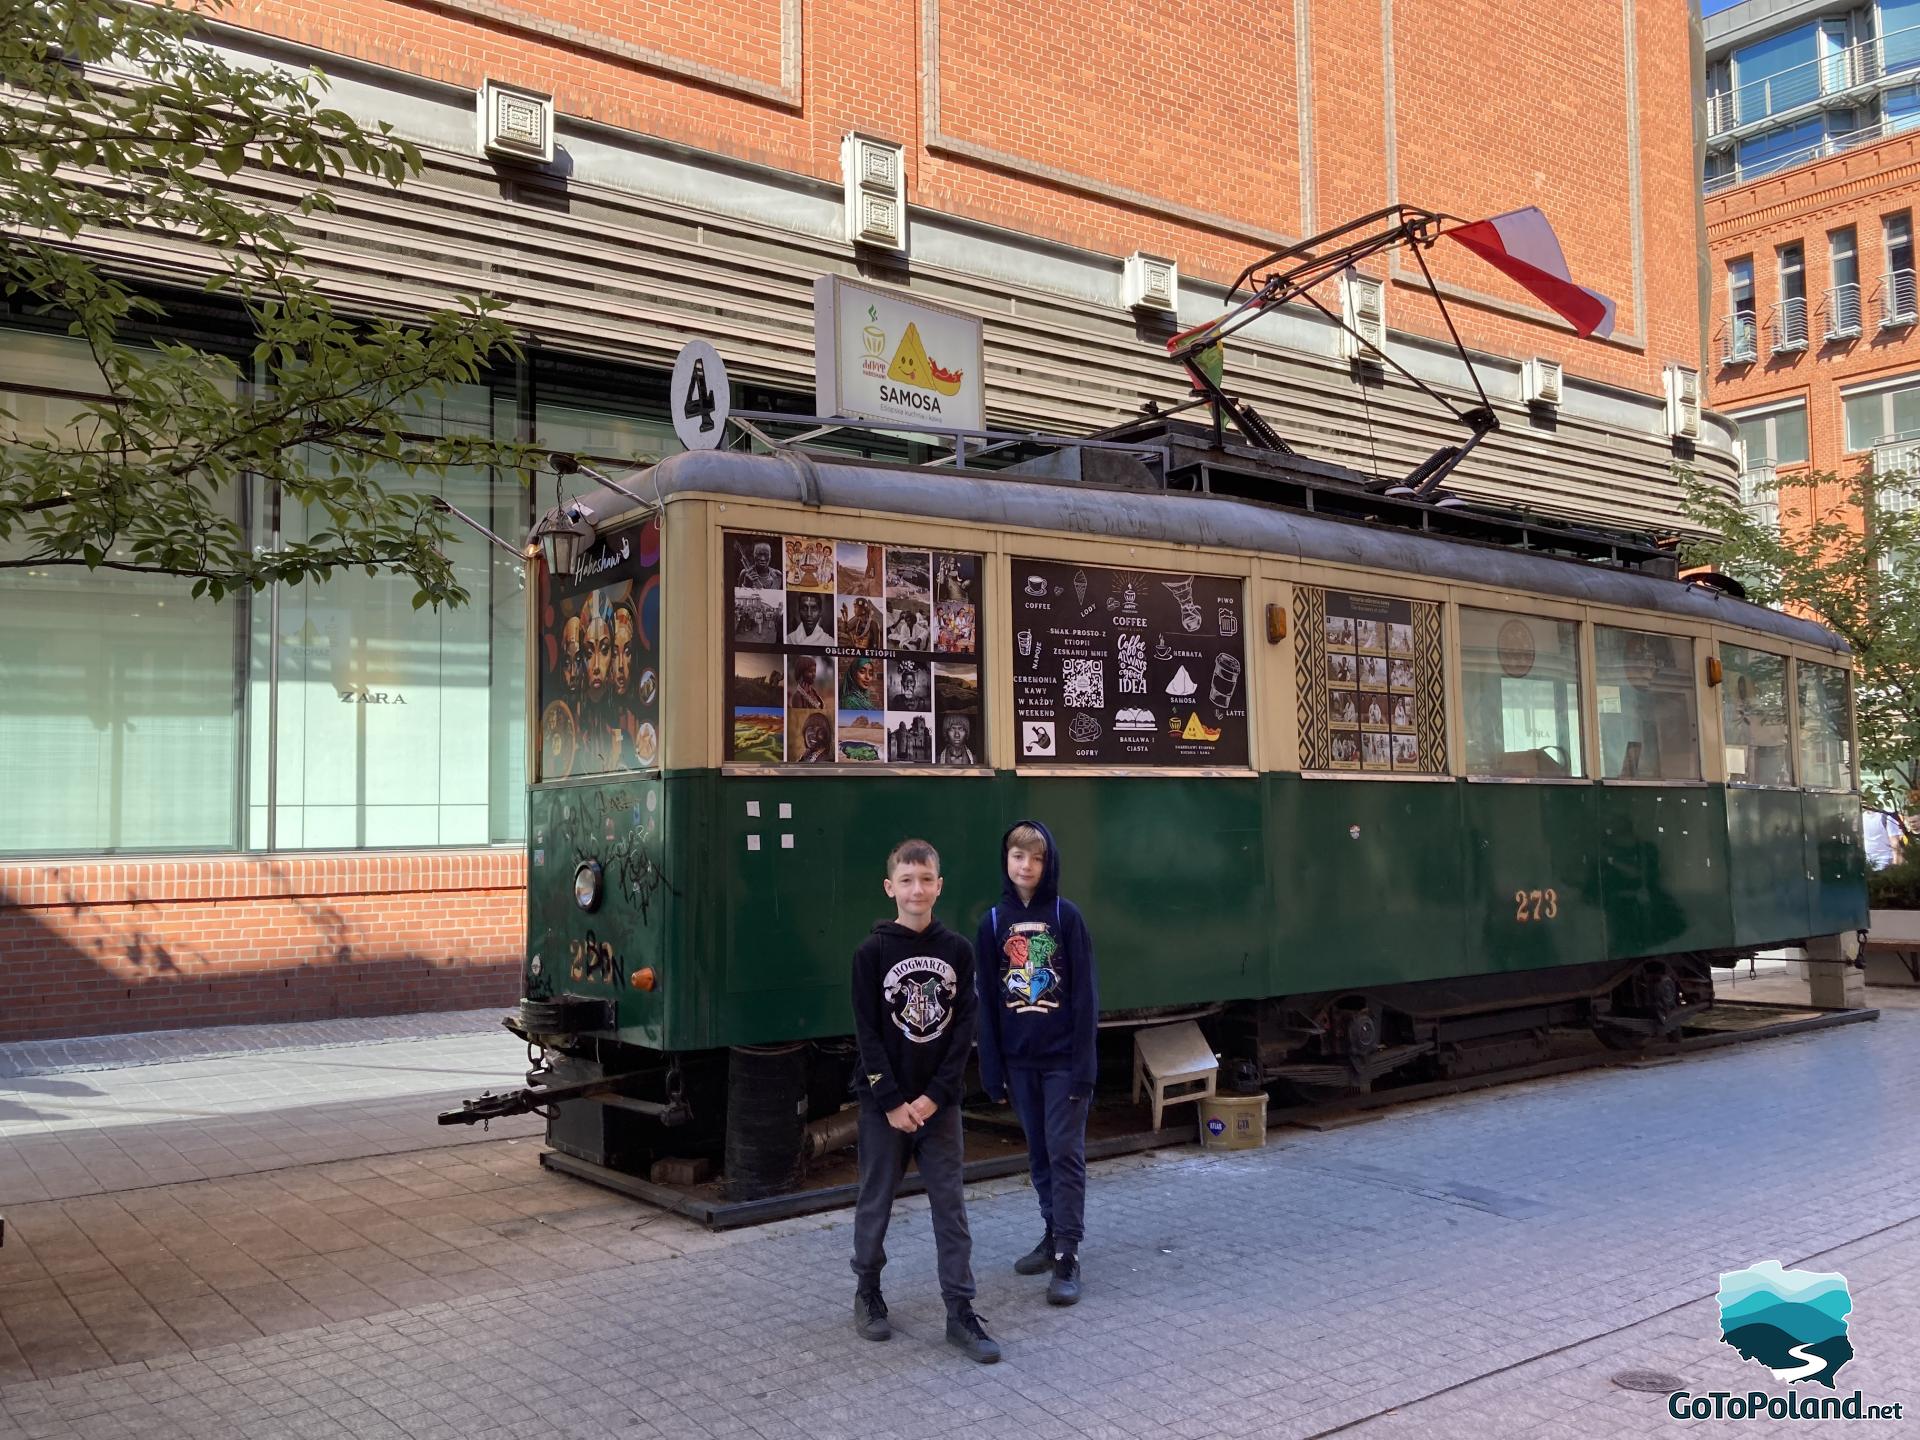 children stand next to the former tram